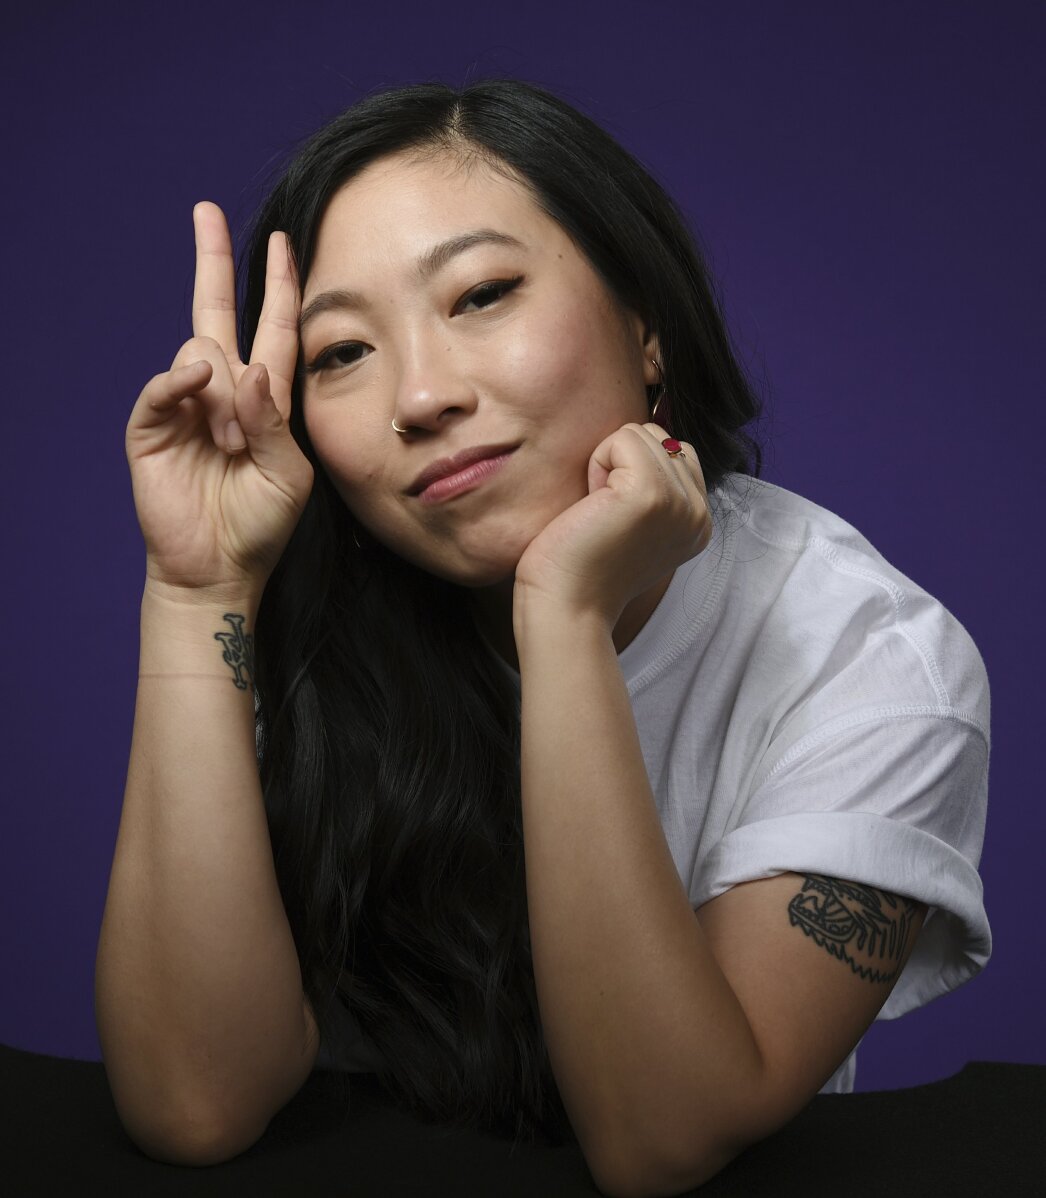 PHOTO GALLERY: Awkwafina - AP Breakthrough Entertainers 2018 | AP News